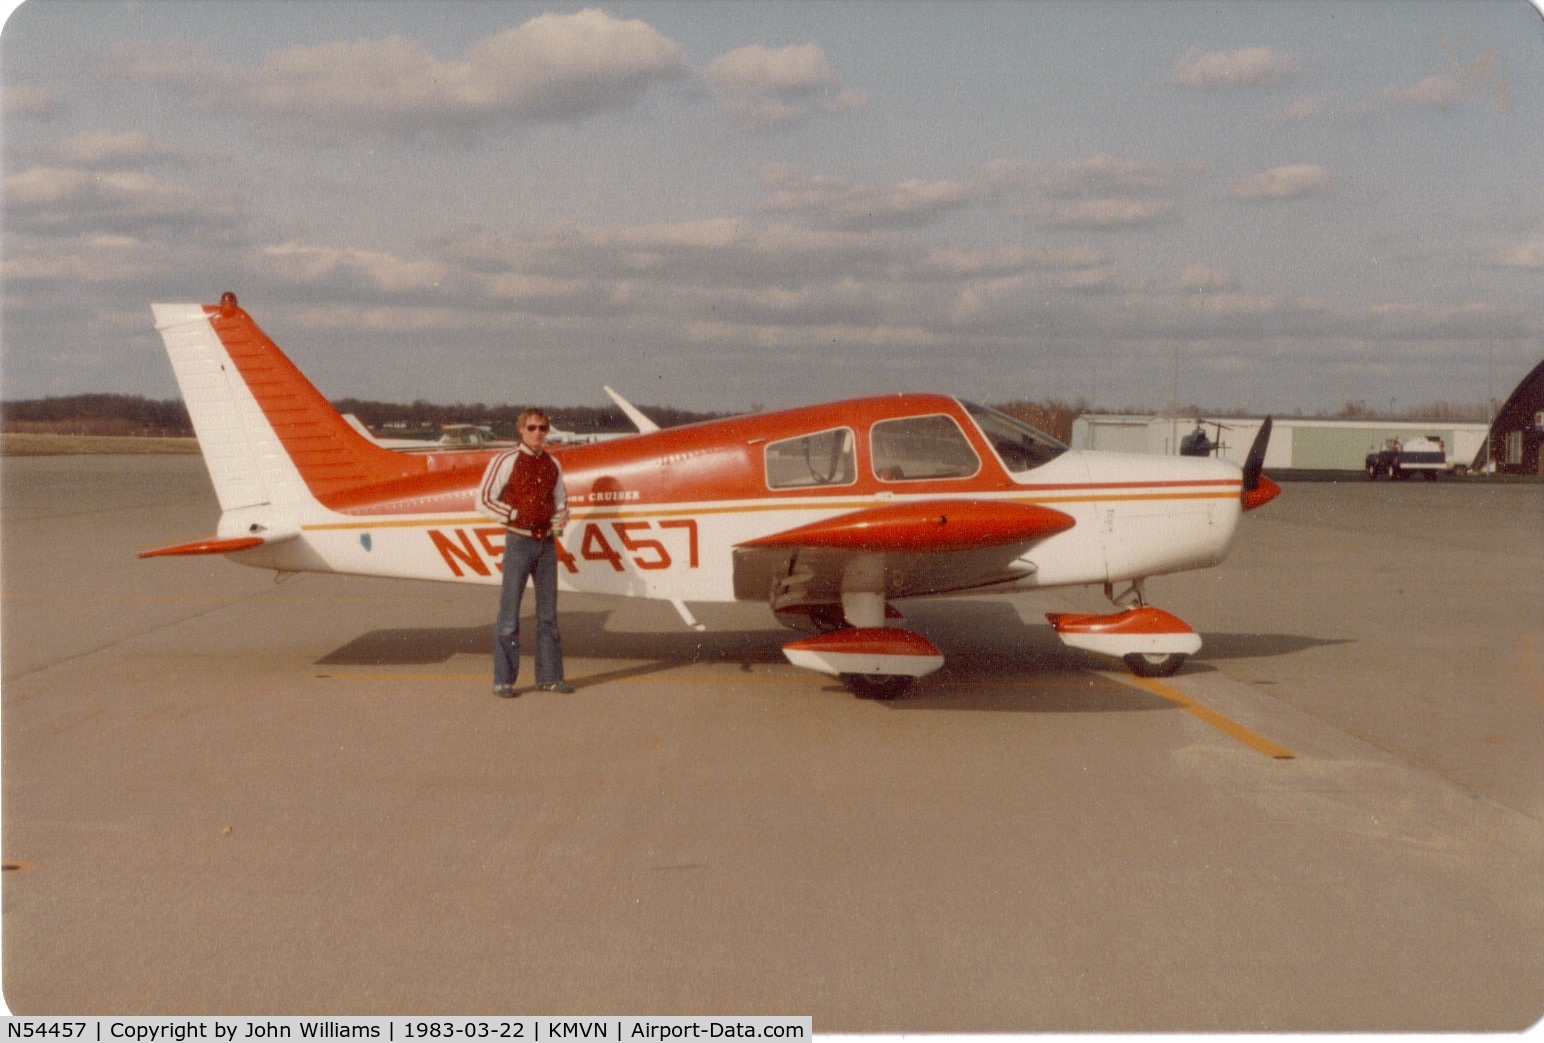 N54457, 1973 Piper PA-28-140 C/N 28-7425138, Taken at Mount Vernon, IL 3/22/83 when N54457 was owned by Aeroflite, Inc. Marion, IL.  $29.50 an hour.  What a deal!